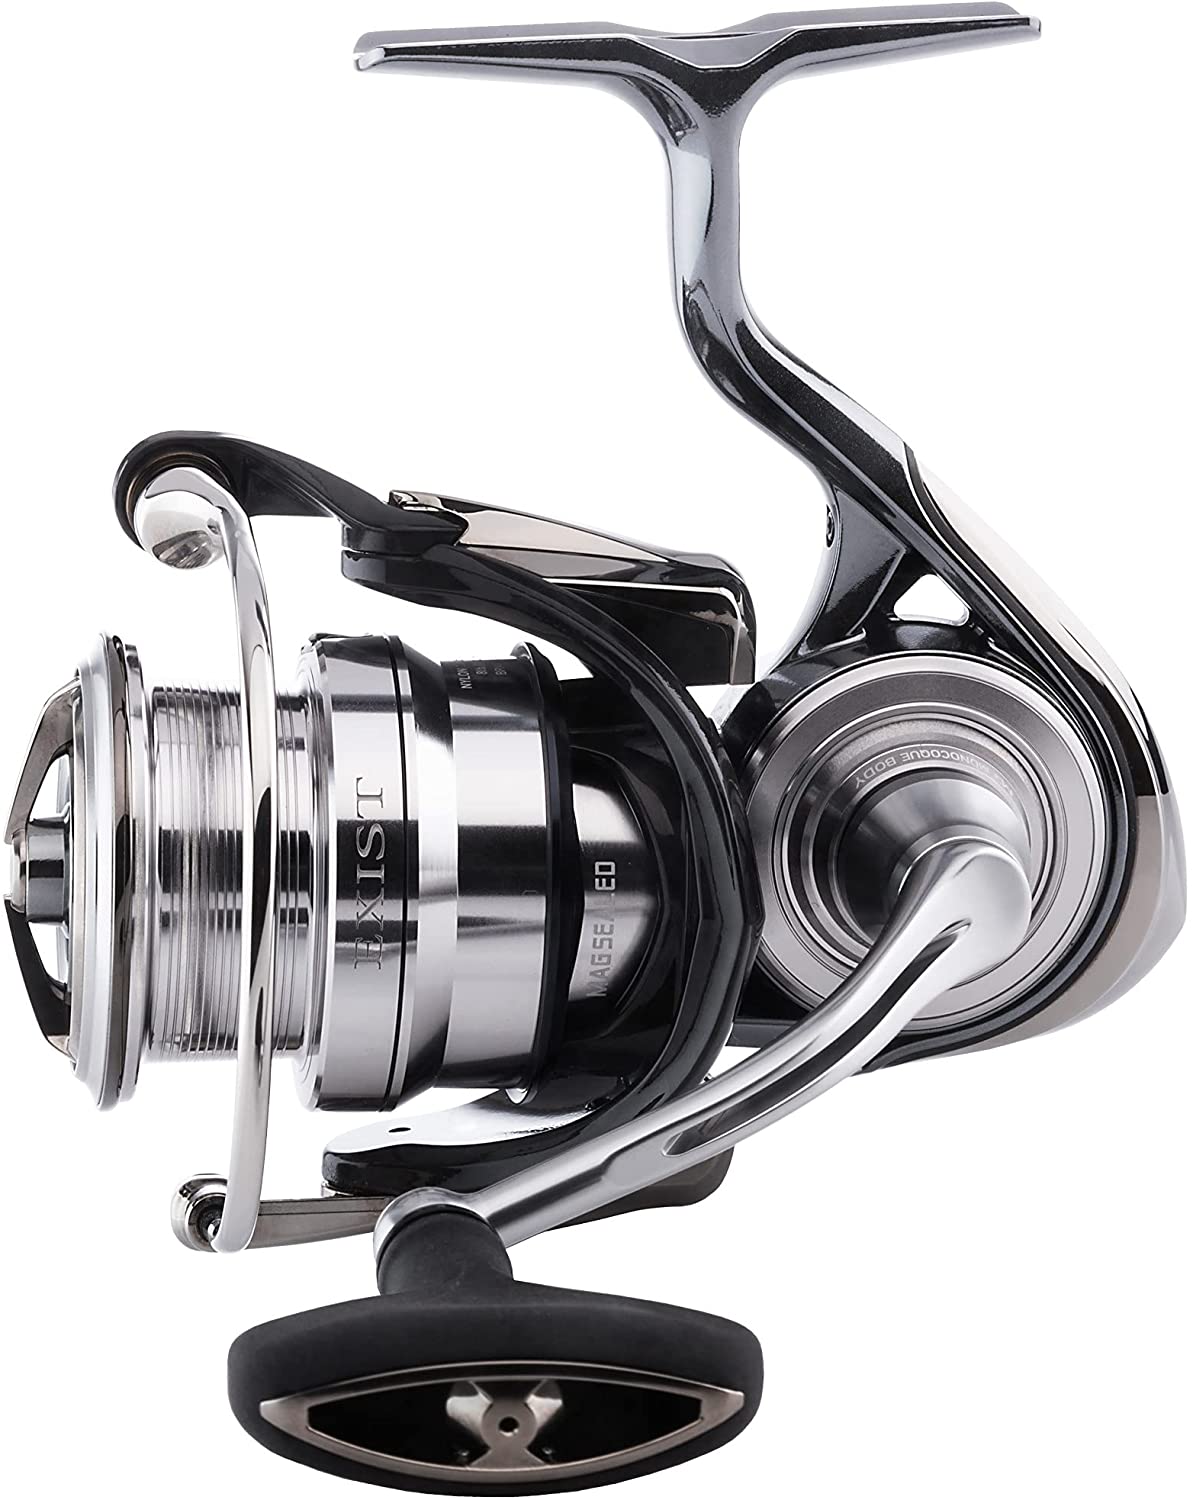 Daiwa Exist LT Right Hand 2500-xh Spinning Reel - Discovery Japan Mall